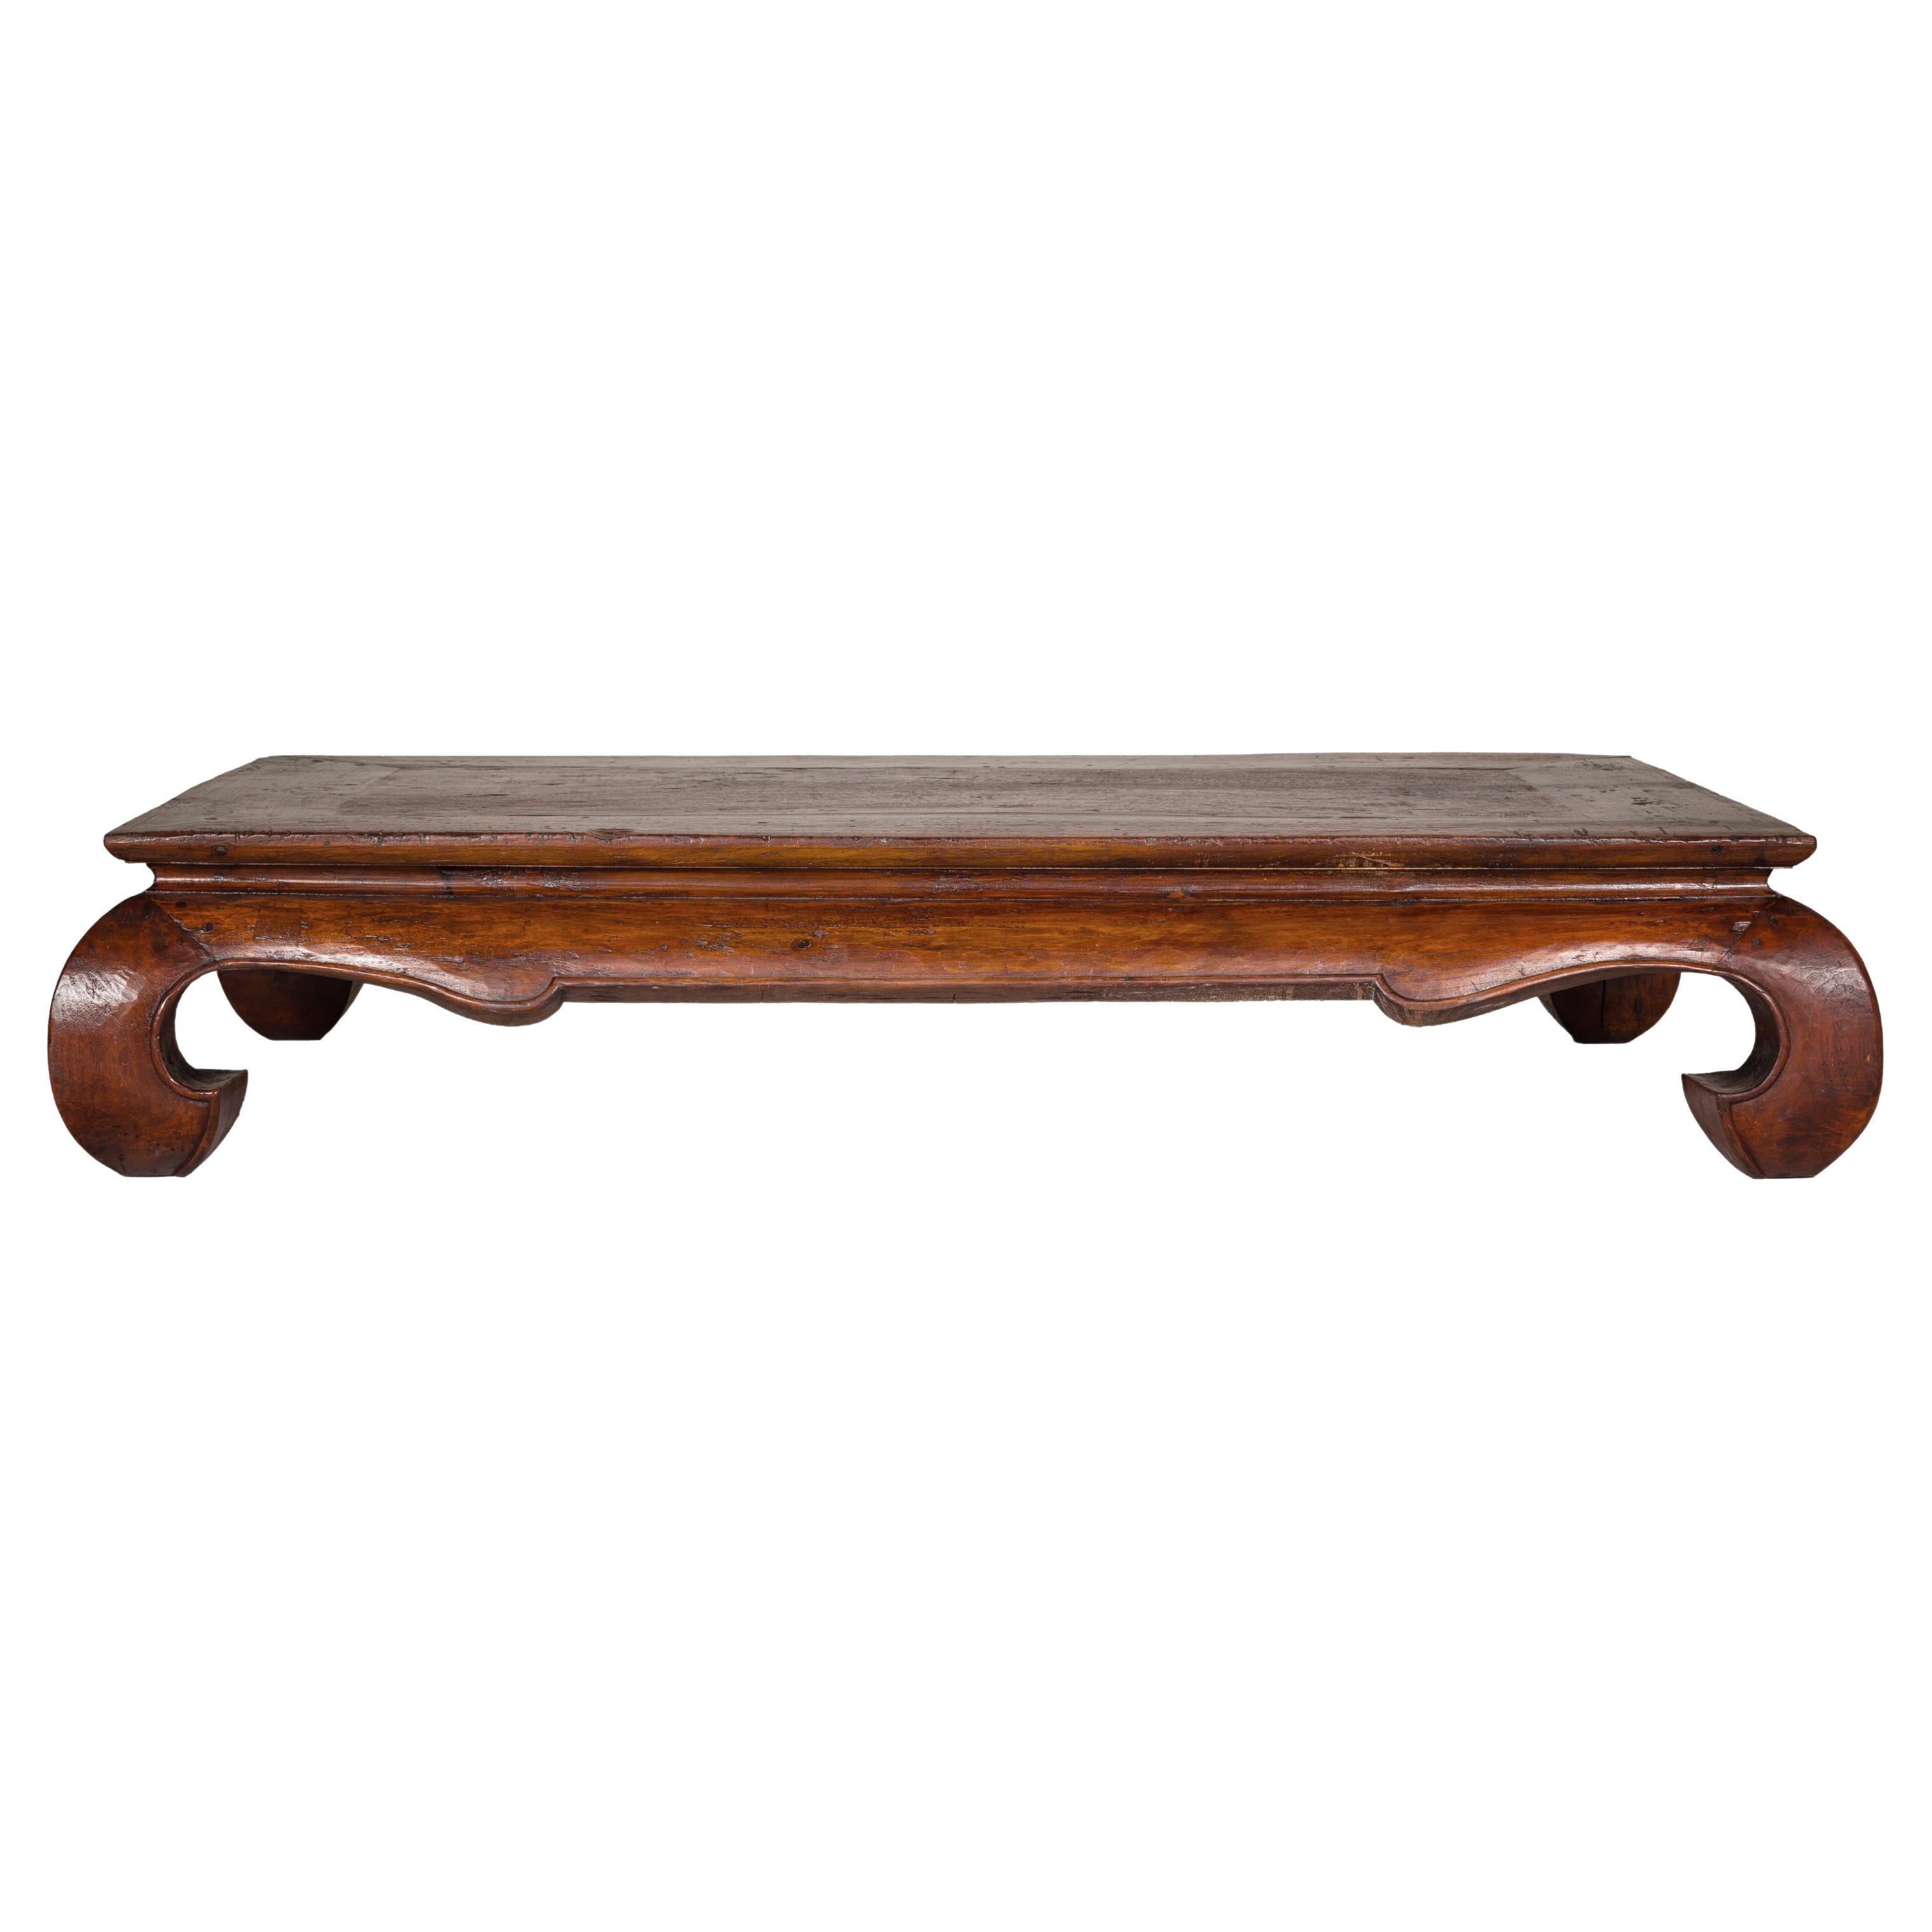 Qing Dynasty 19th Century Chow Leg Kang Table with Weathered Rustic Patina For Sale